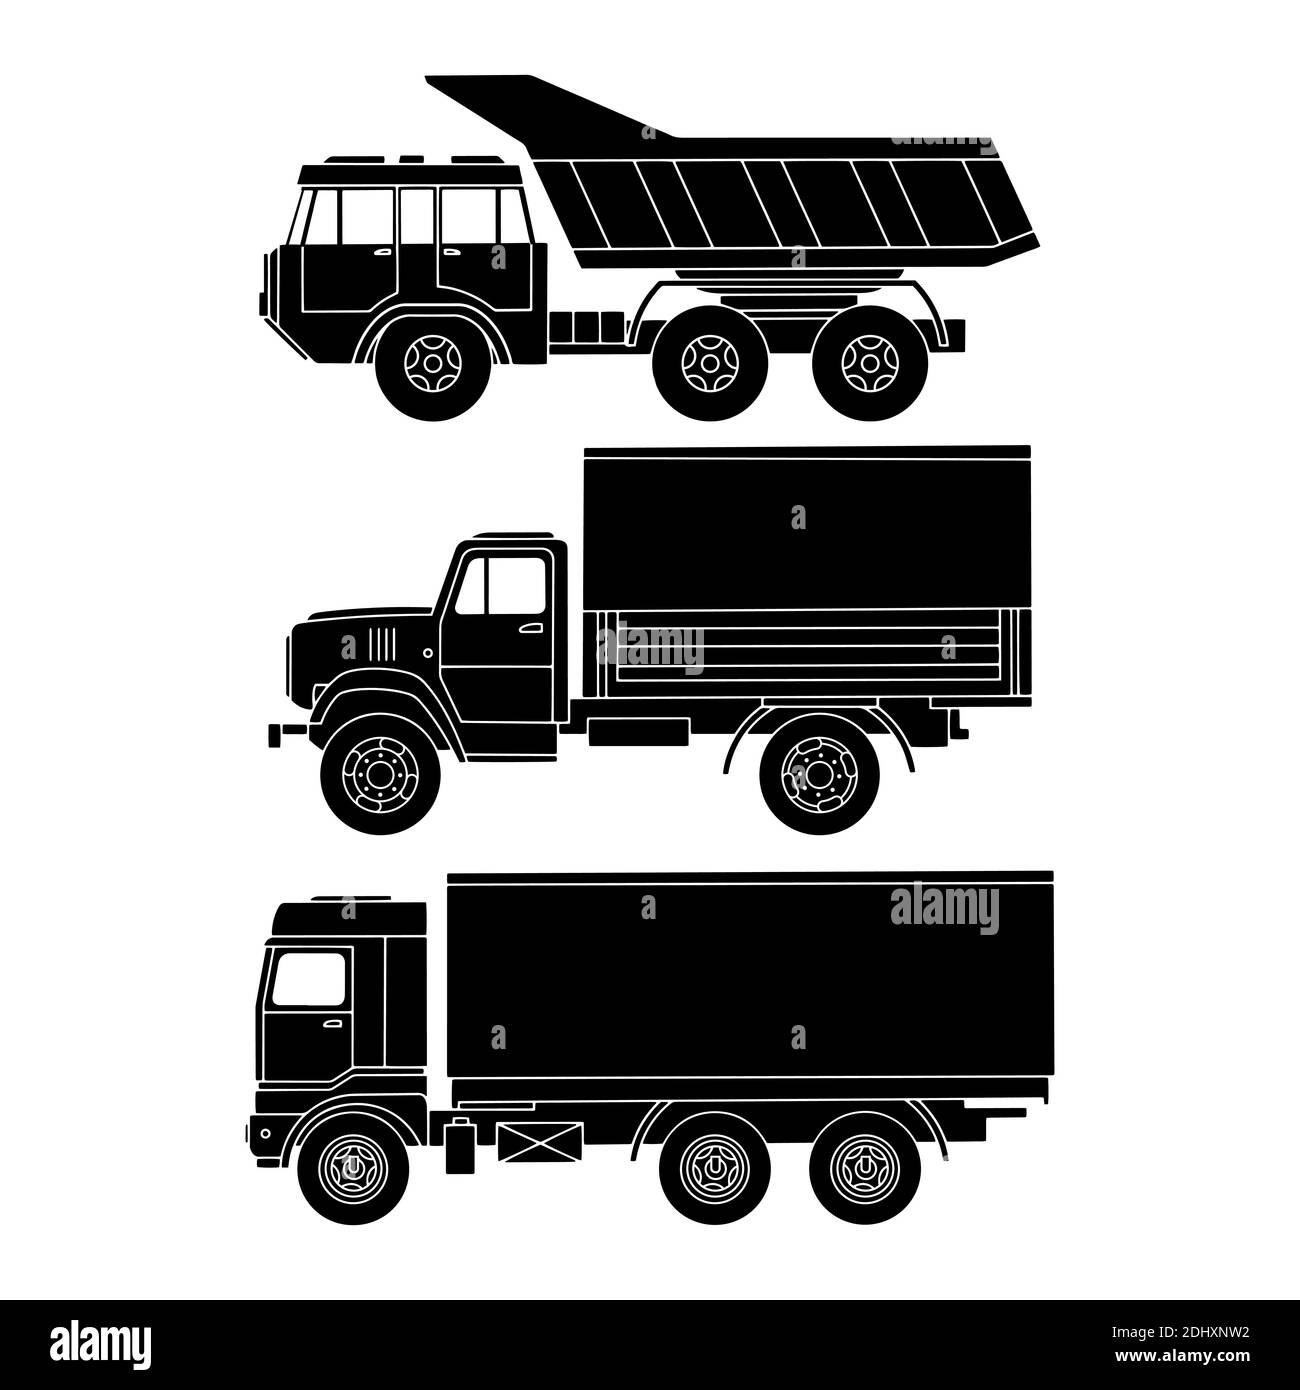 Truck side view set. Simple black icon Stock Vector